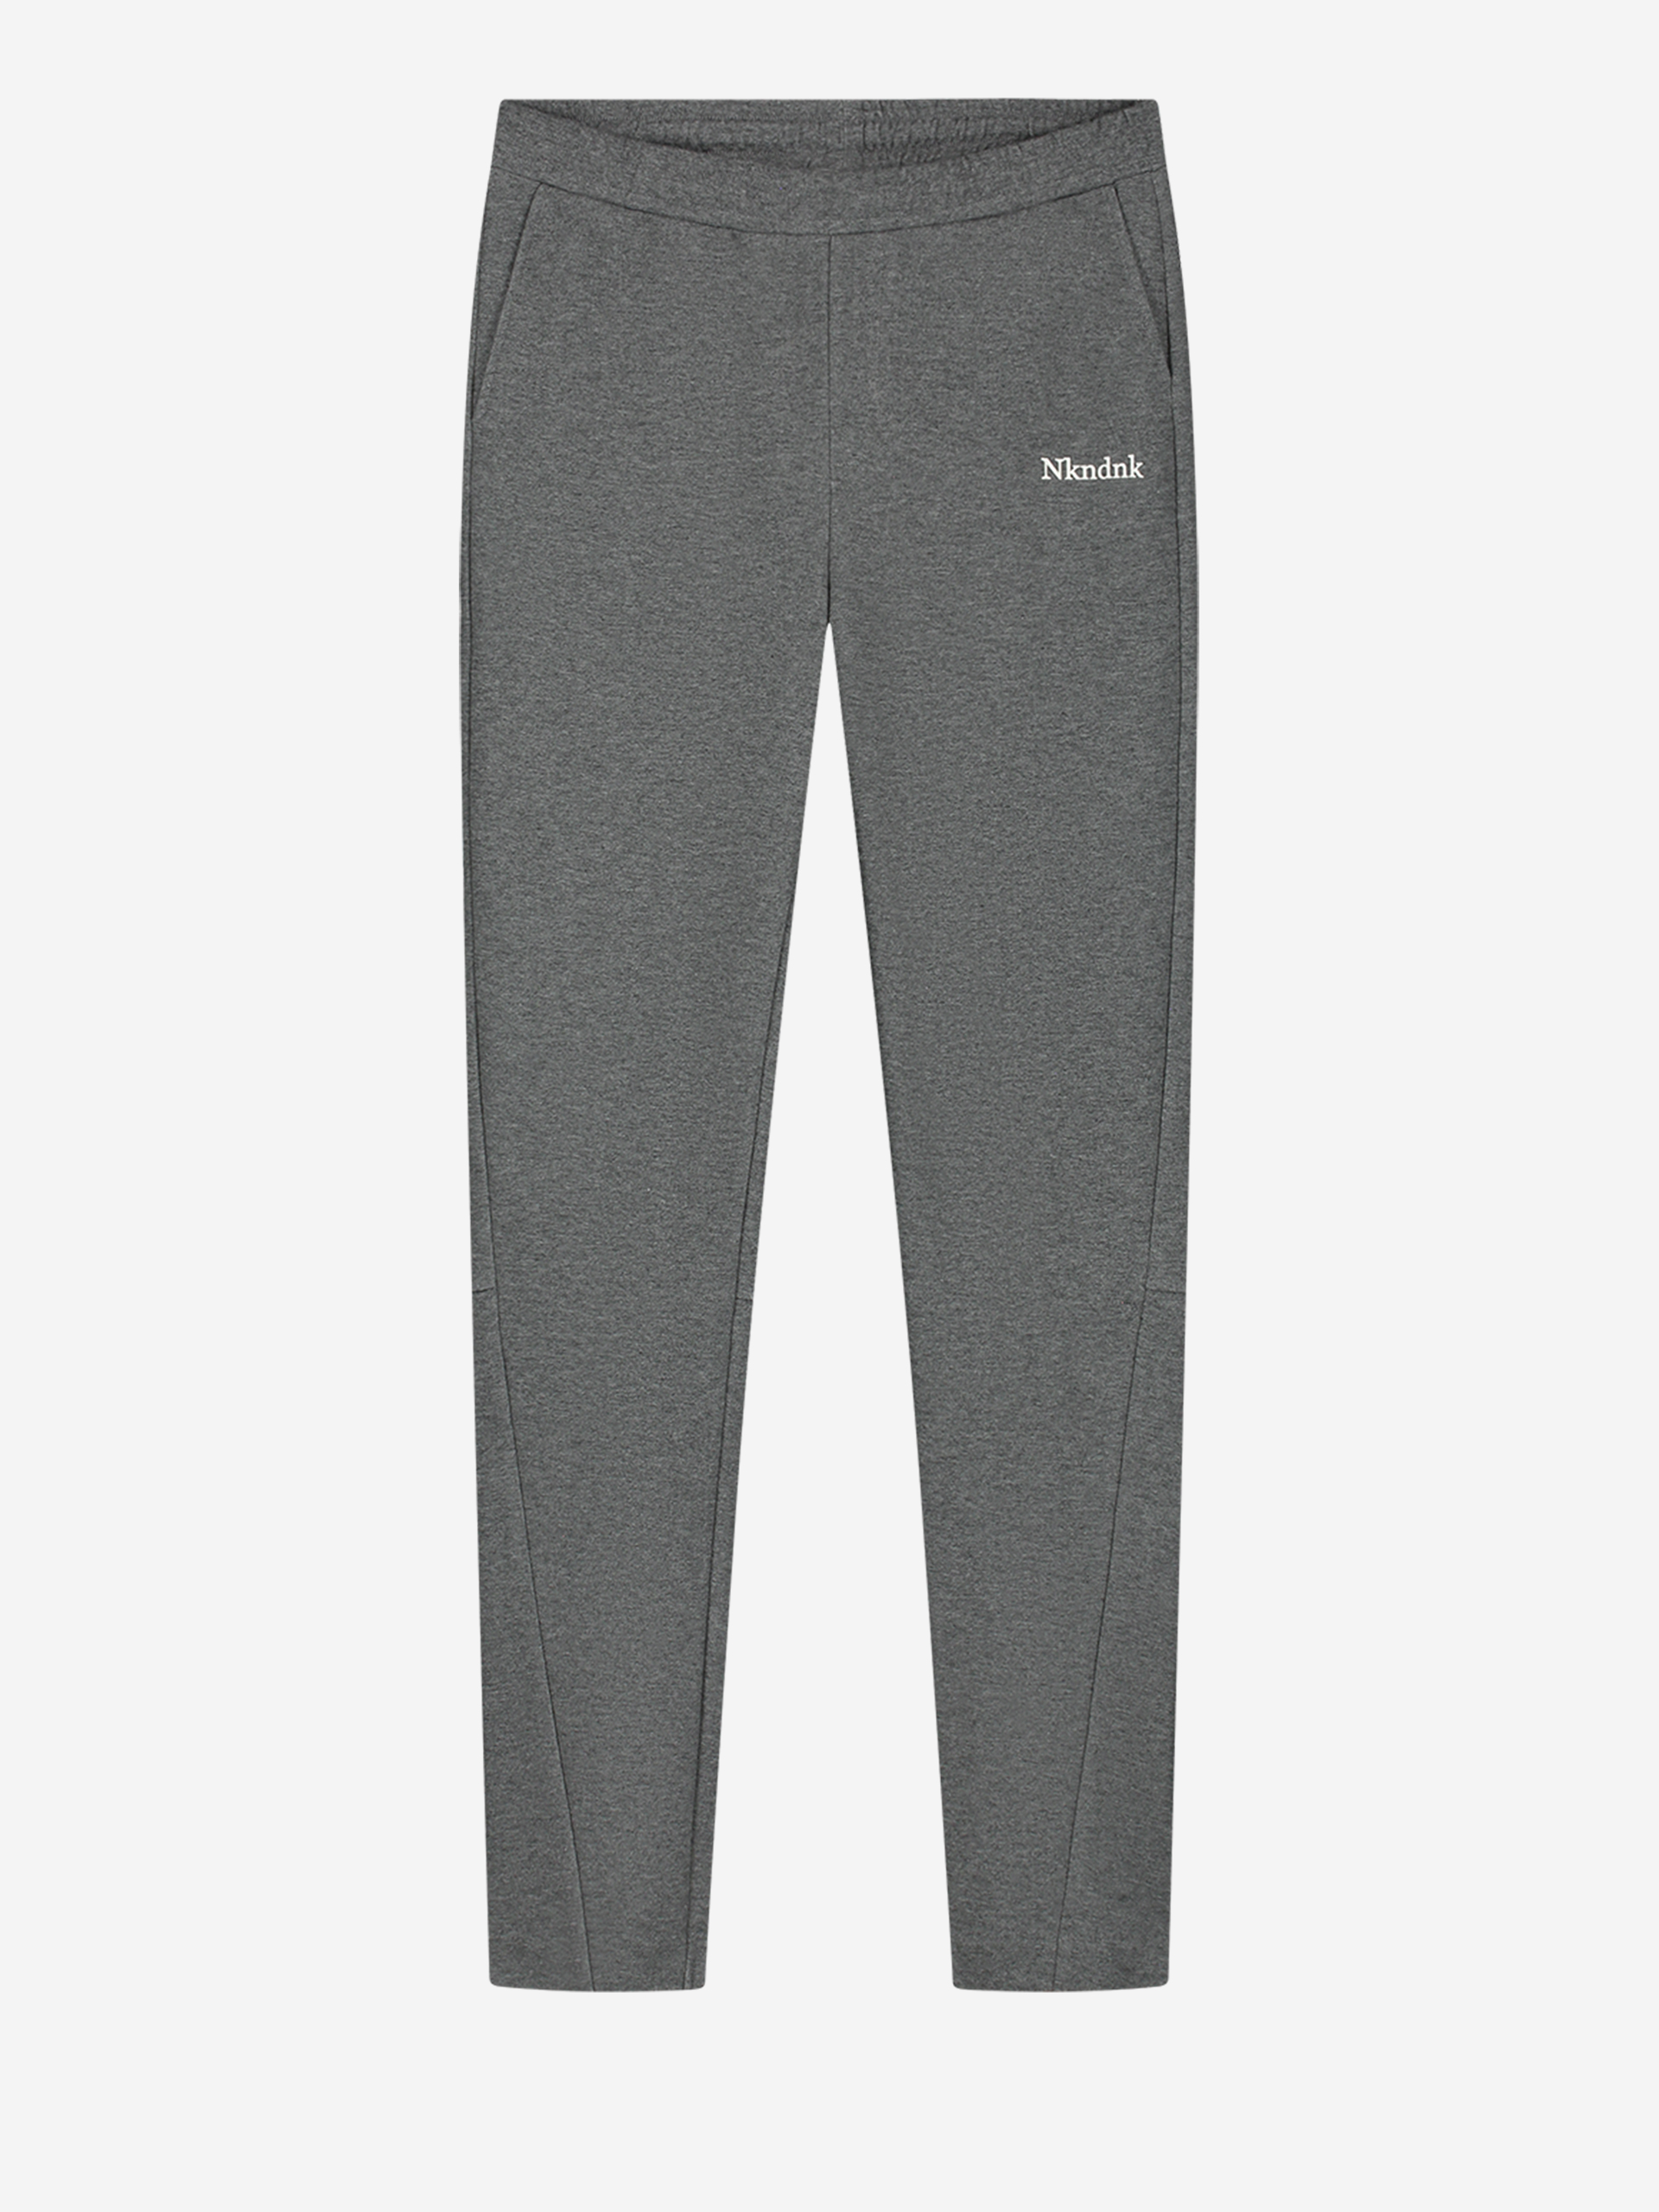 Fitted Sweatpants with mid rise